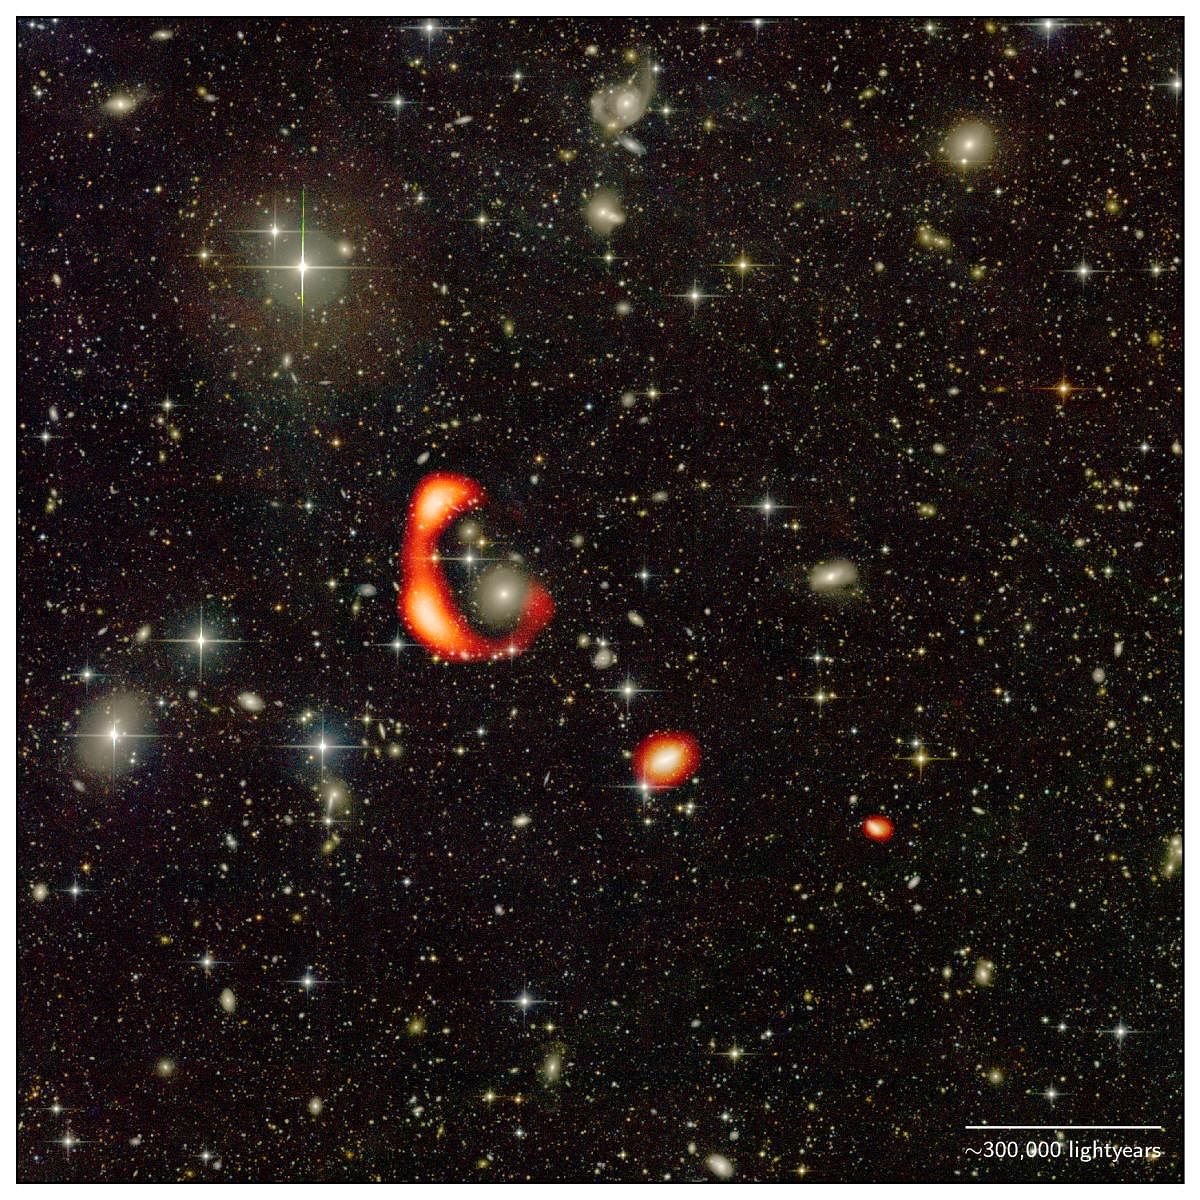 The large red-coloured ring is the giant hydrogen ring discovered using GMRT. The other two red blobs distribution of hydrogen around two other galaxies in the vicinity of the ring.